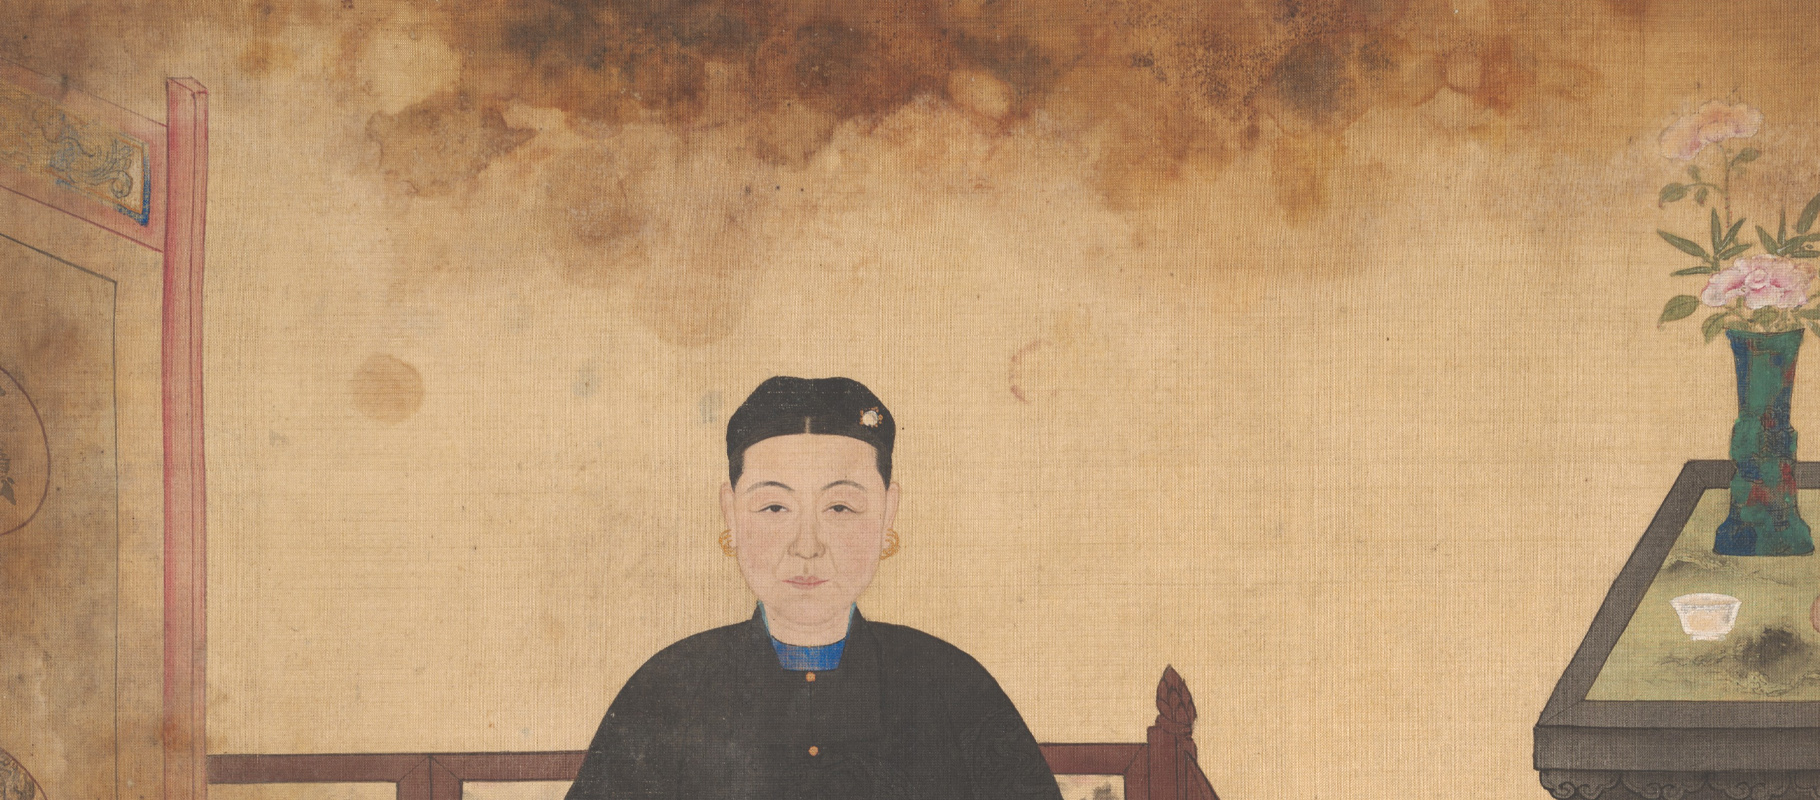 Stained chinese portrait